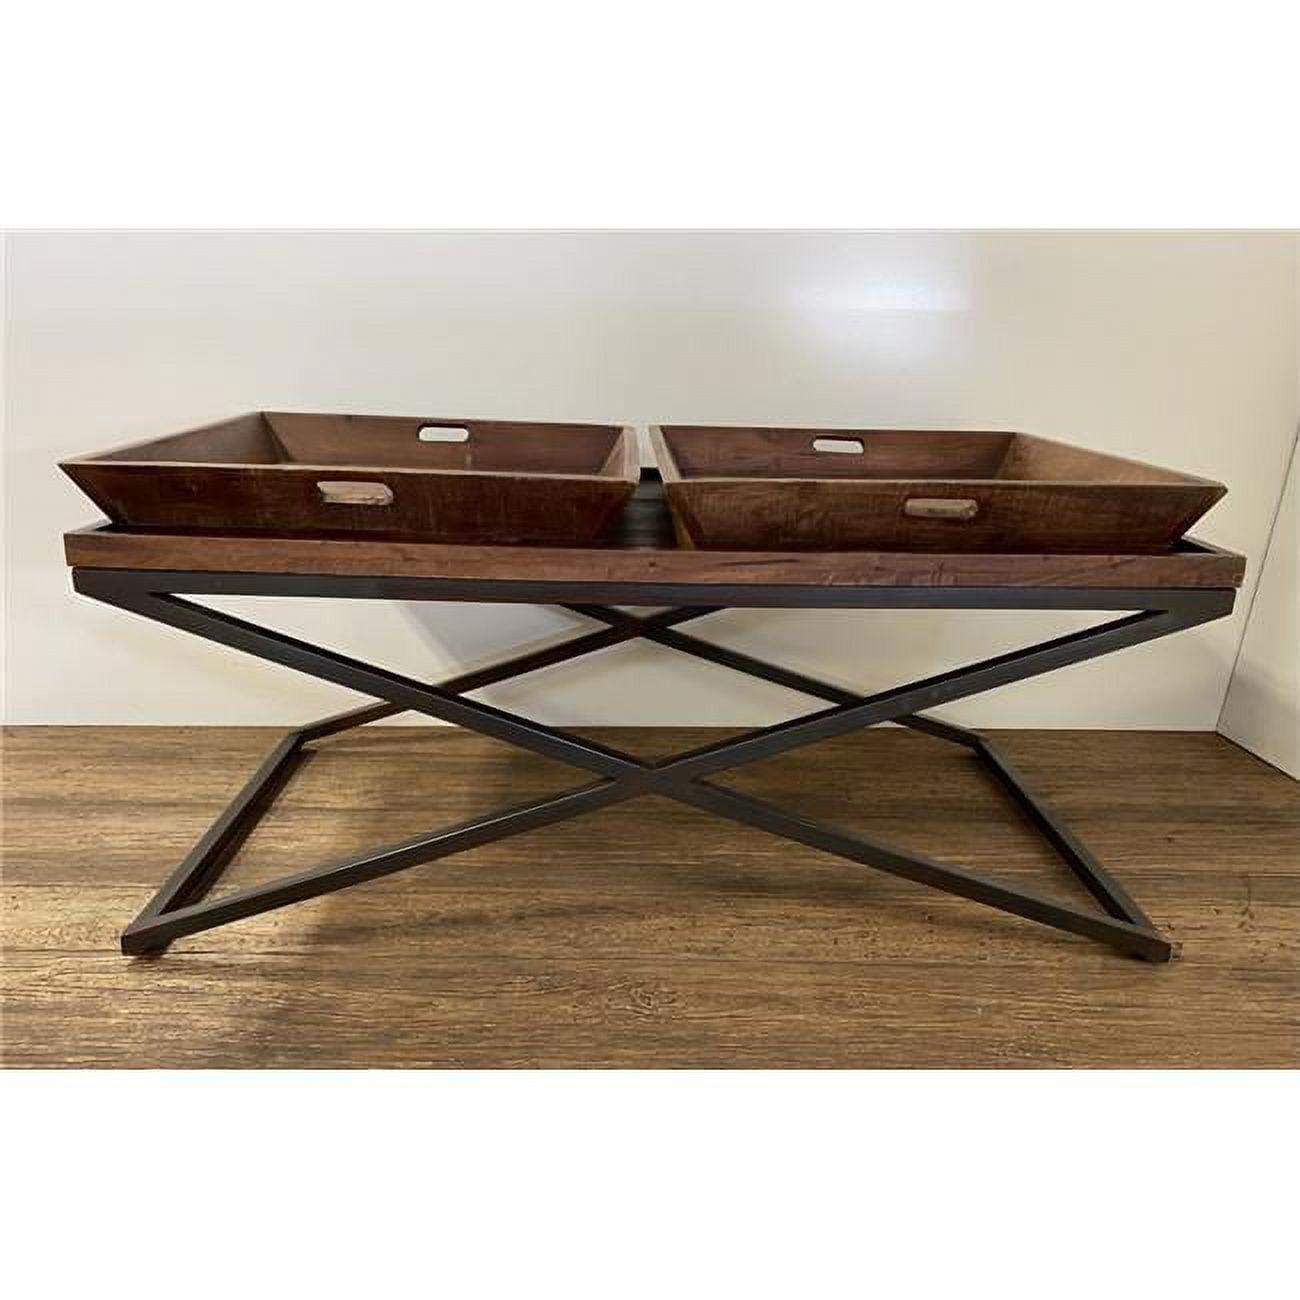 Rustic Mango Wood & Iron Cross-Leg Lift-Top Coffee Table with Removable Trays